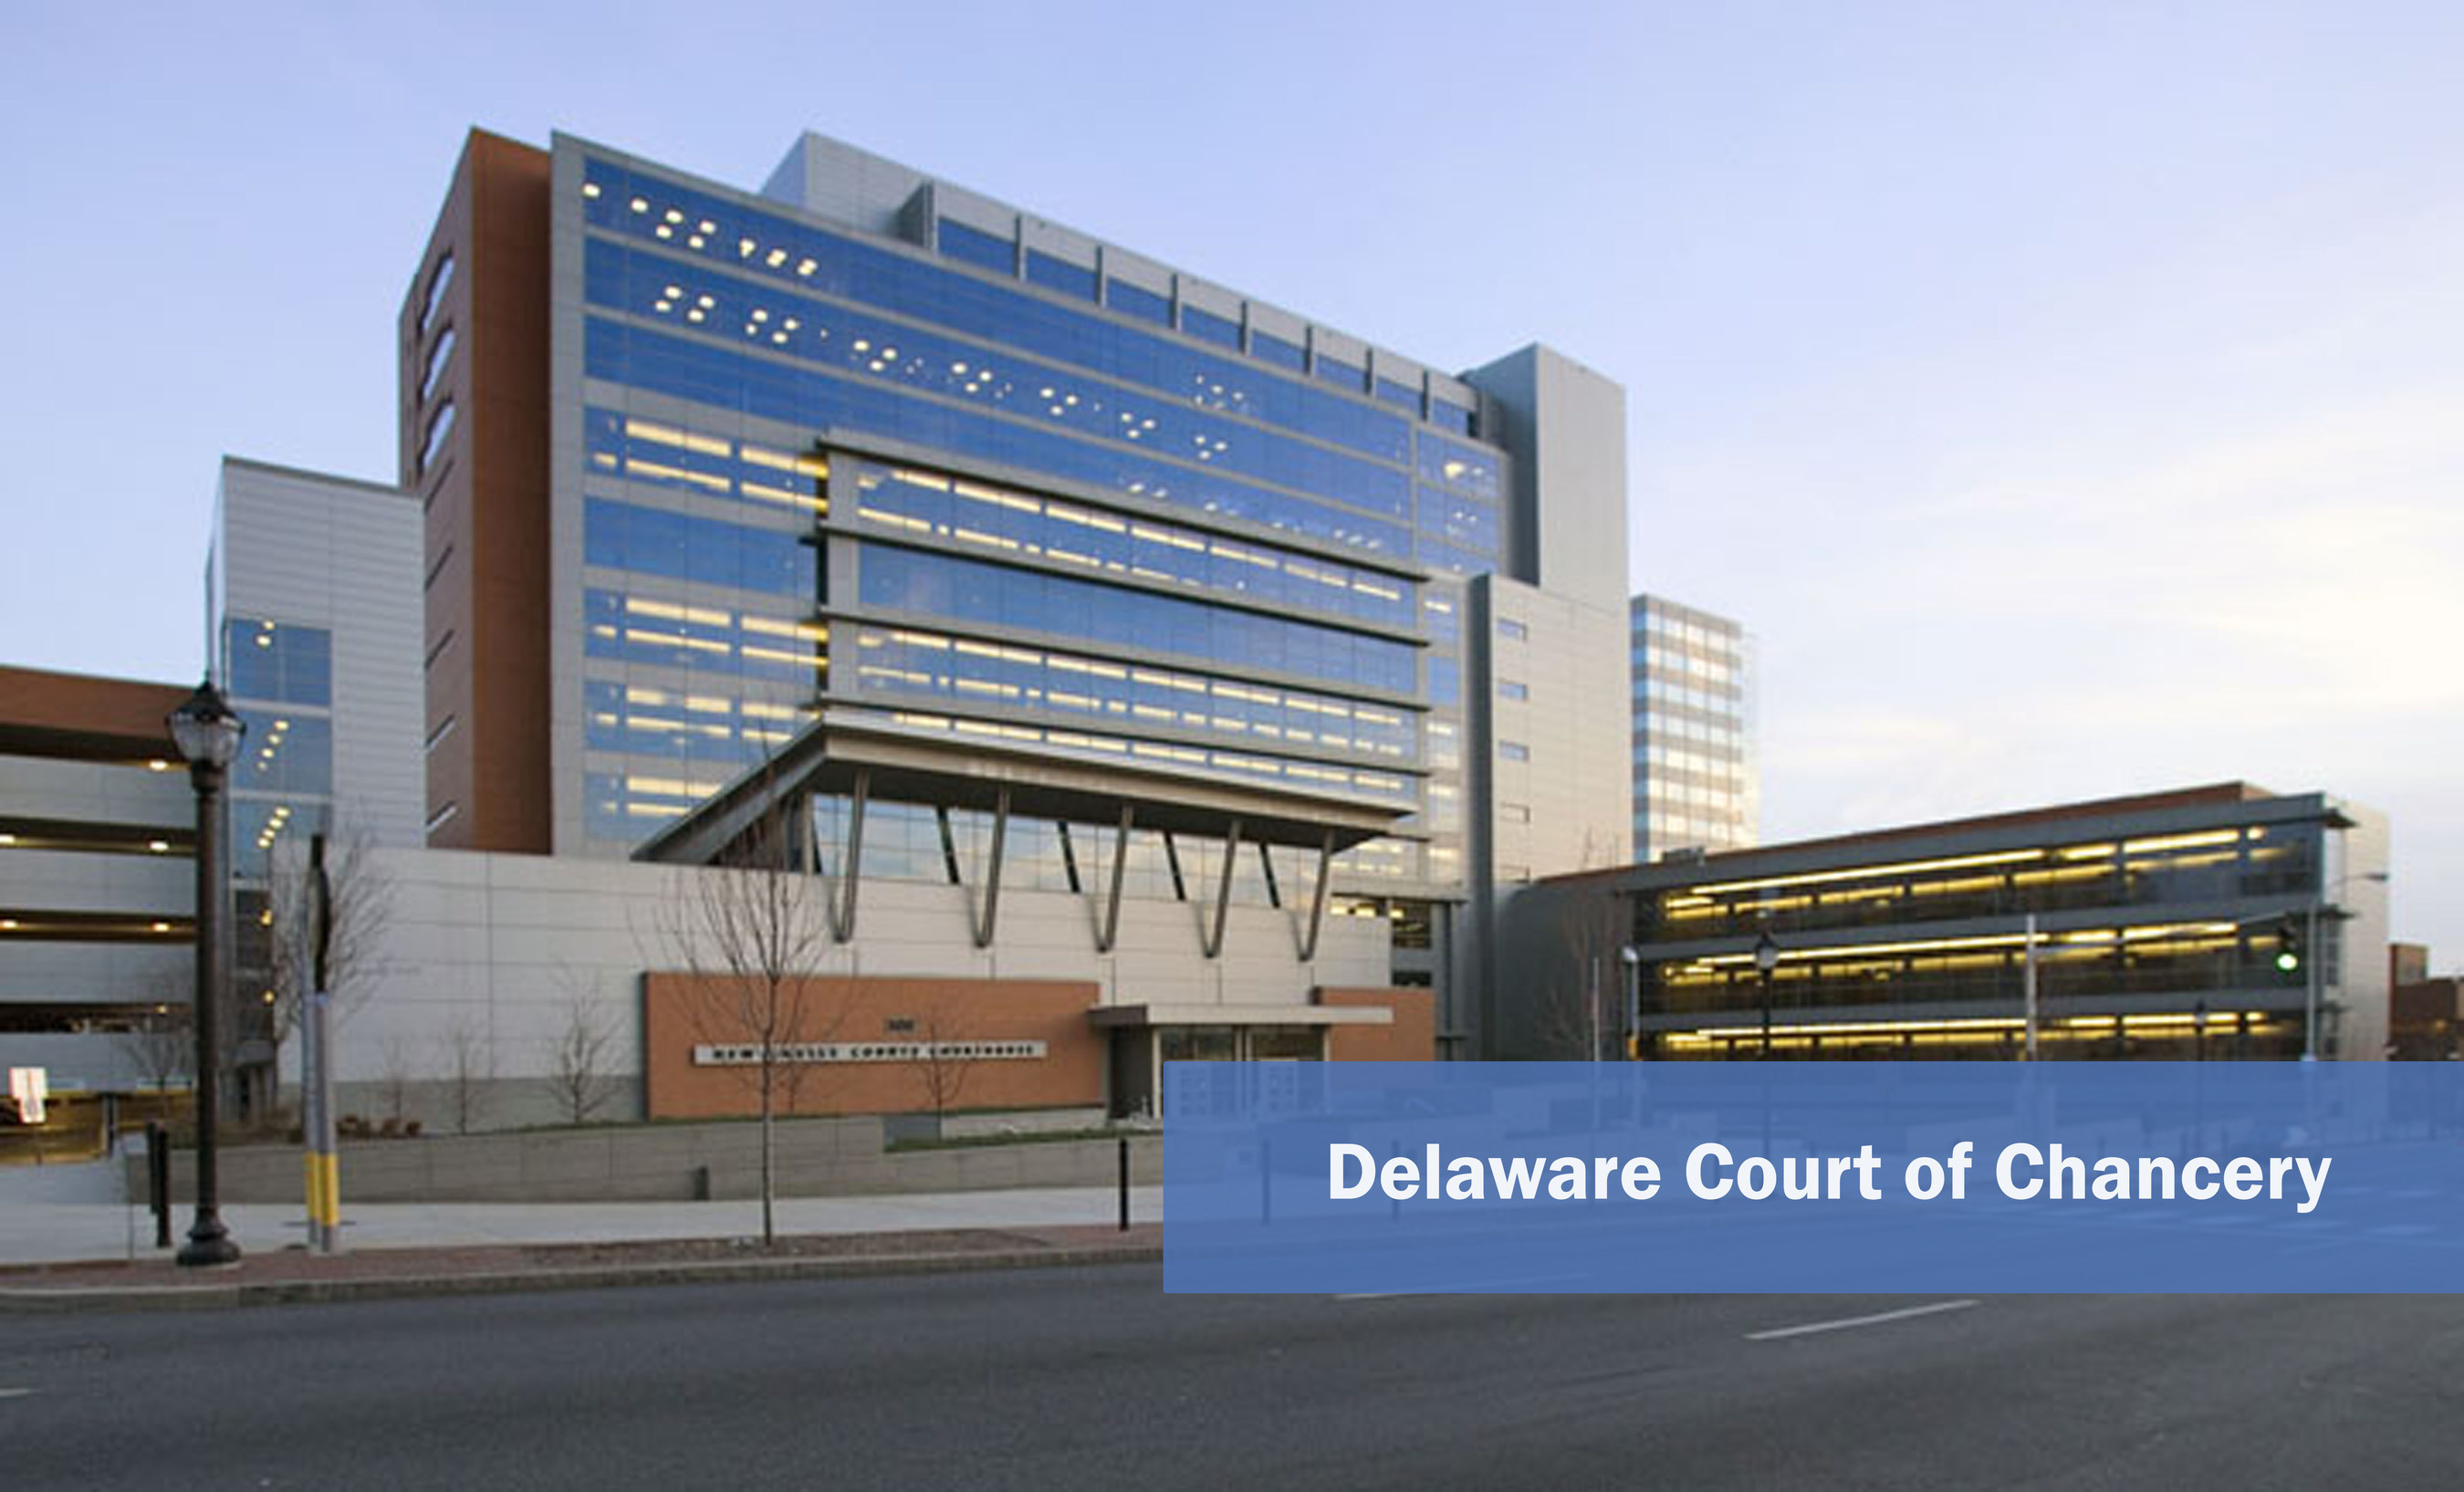 Delaware Court of Chancery (Source/Final Focus)